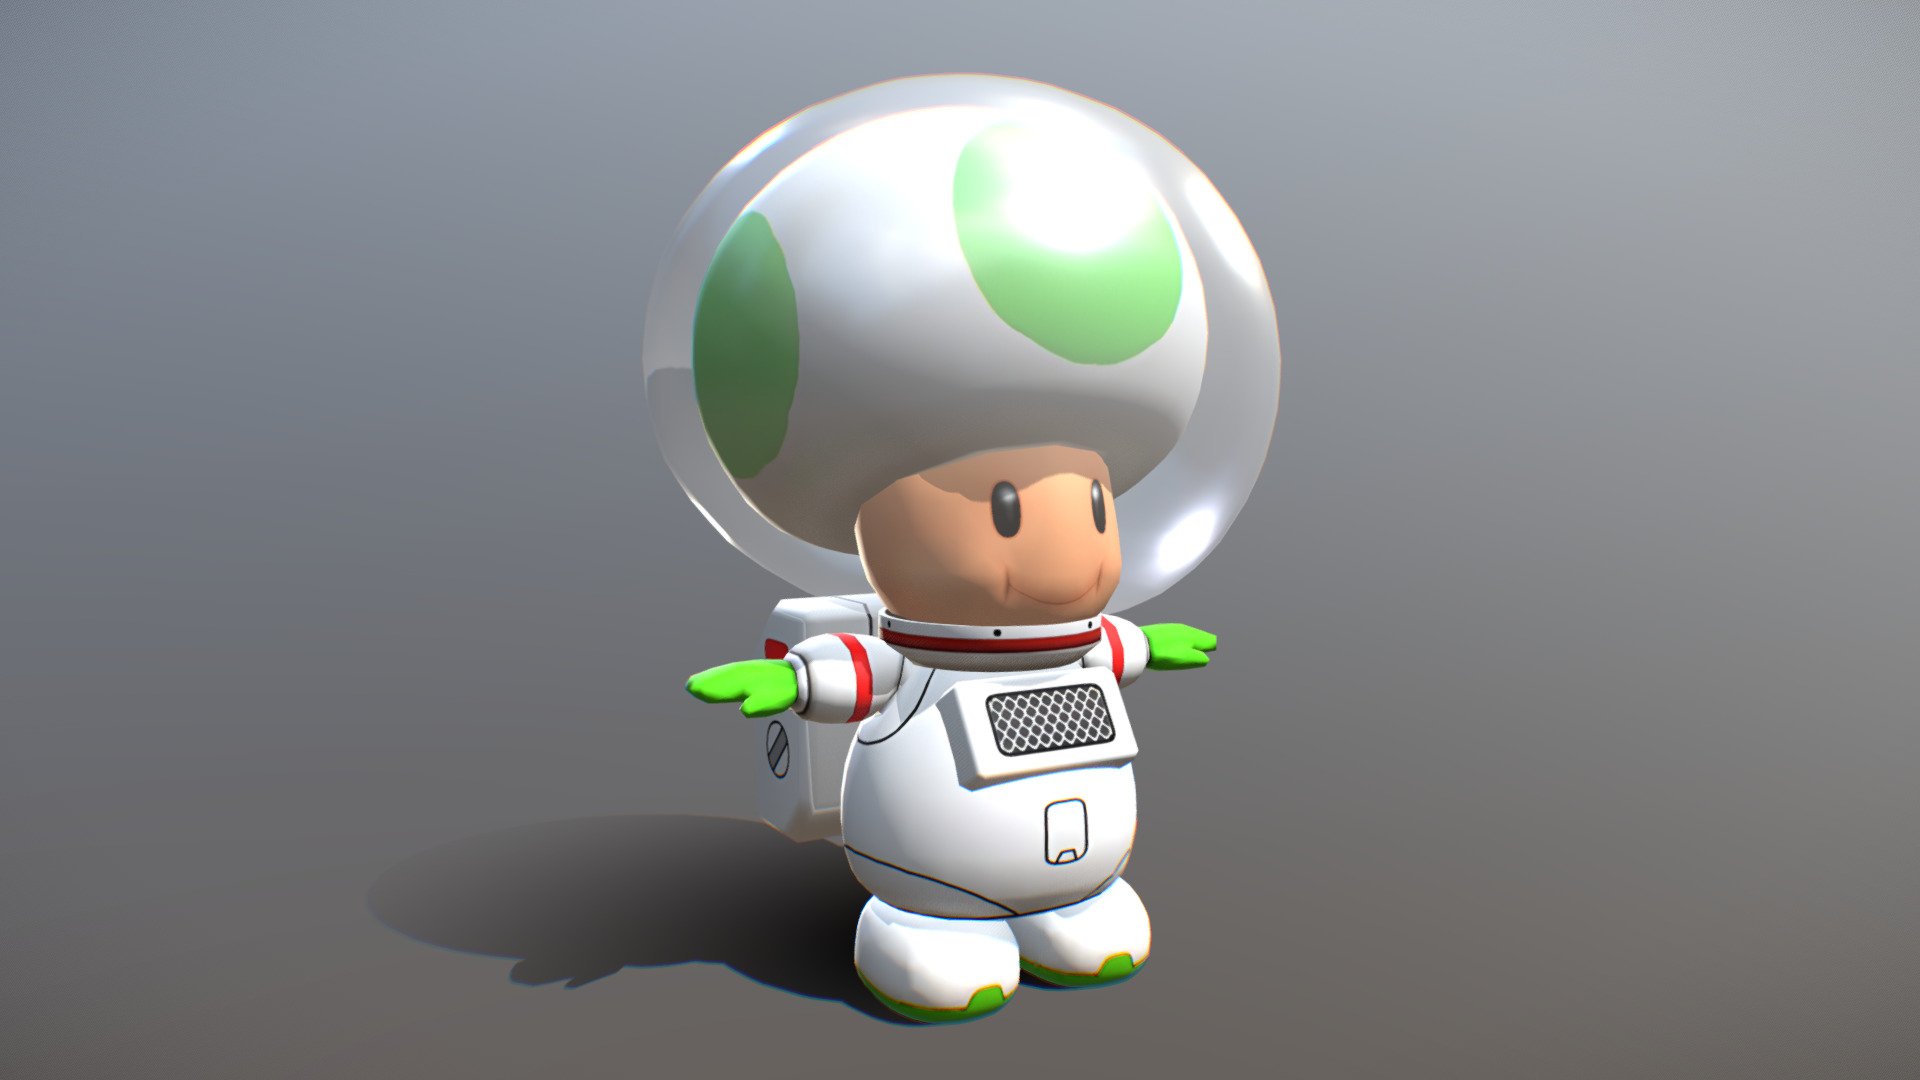 Astronaut Toad Green Hd Mario Kart 8 Buy Royalty Free 3d Model By Xenophilius Xeno 1270